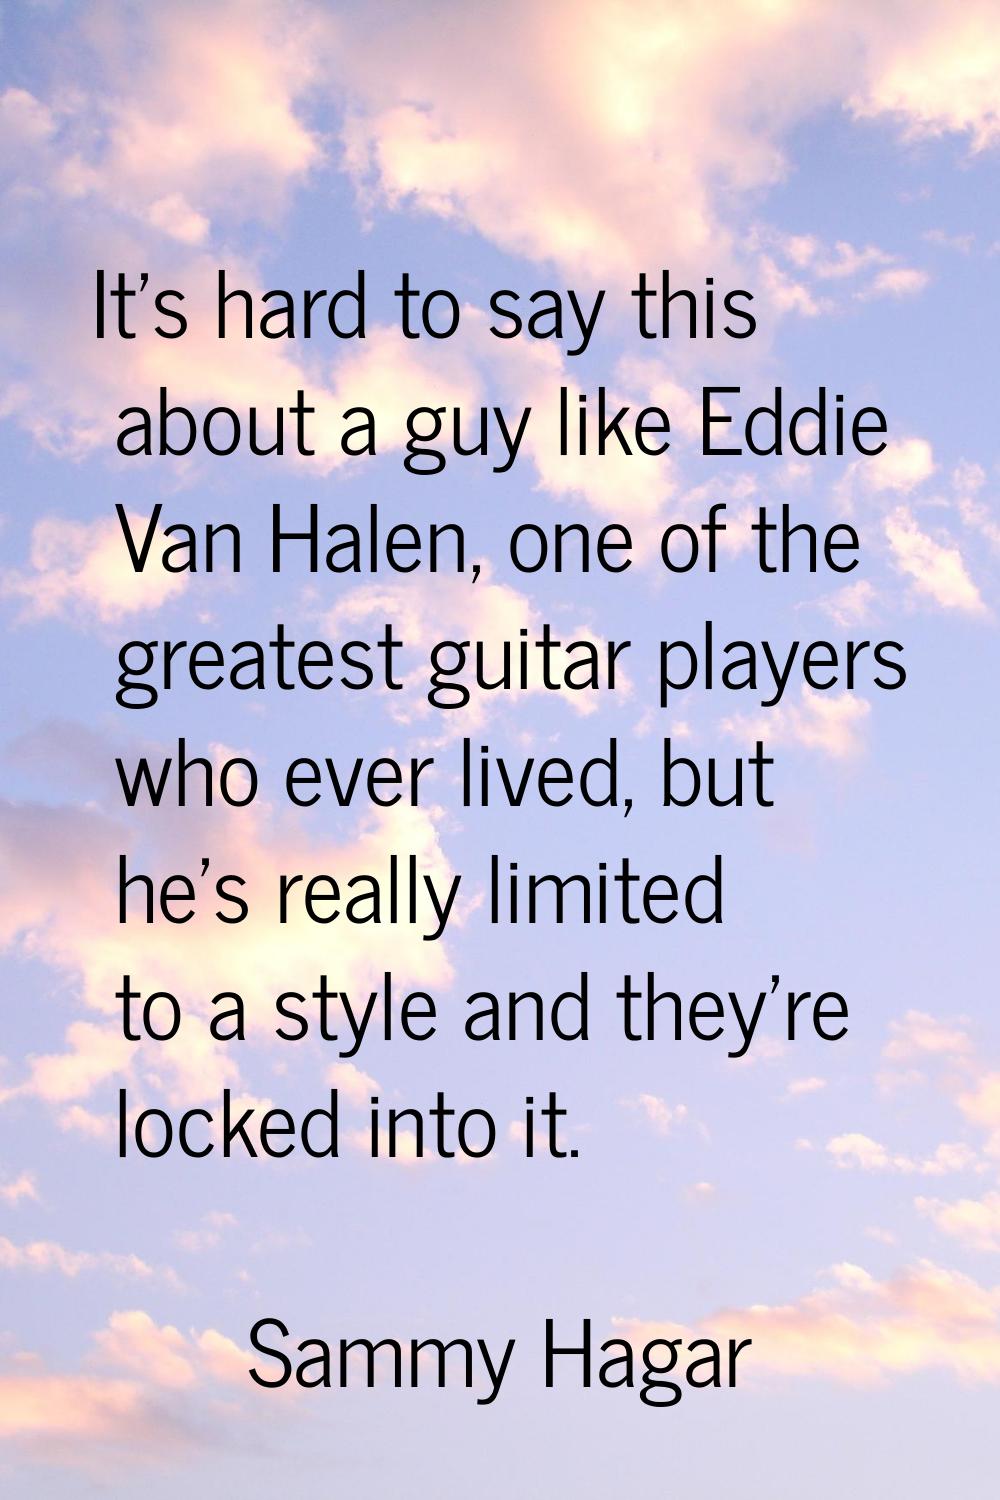 It's hard to say this about a guy like Eddie Van Halen, one of the greatest guitar players who ever